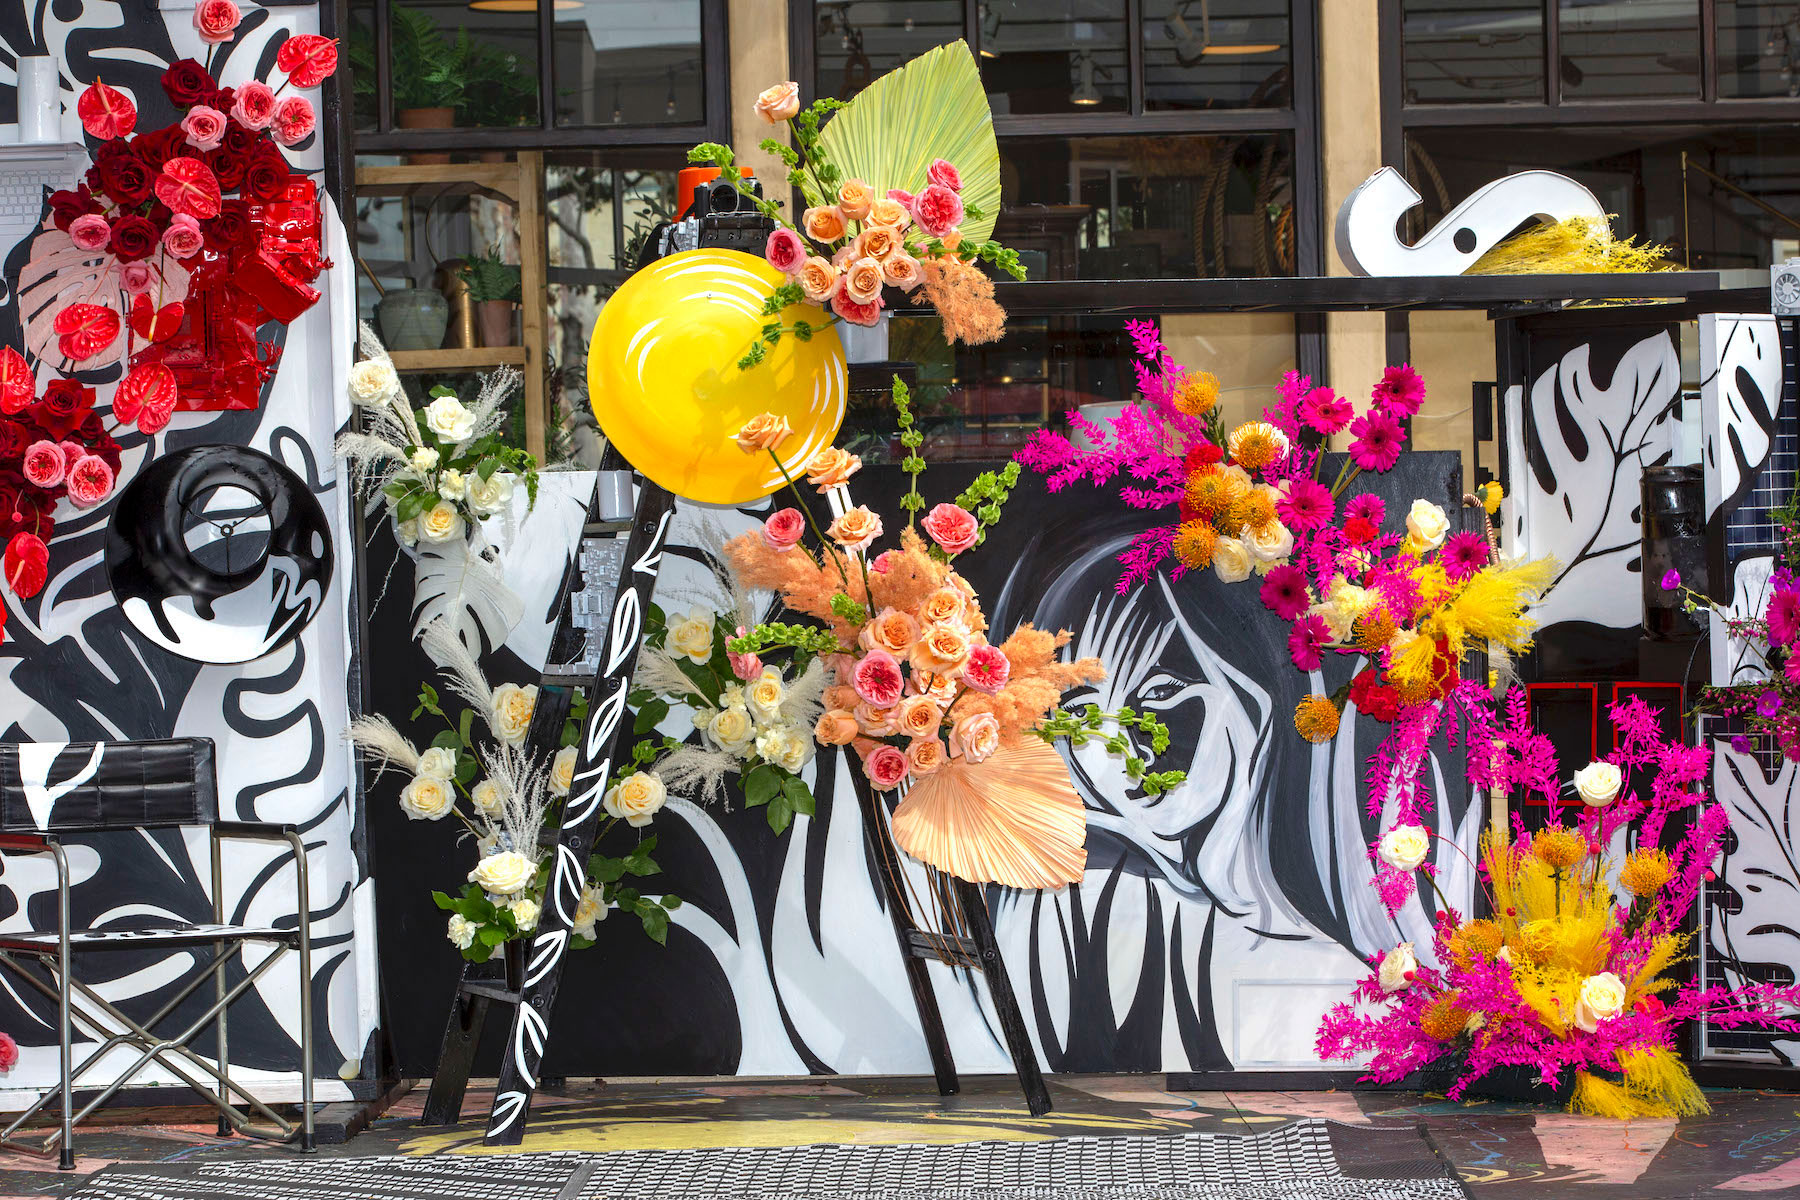 The student-designed floral pop-up mural in Downtown Laguna combined fresh florals with found objects